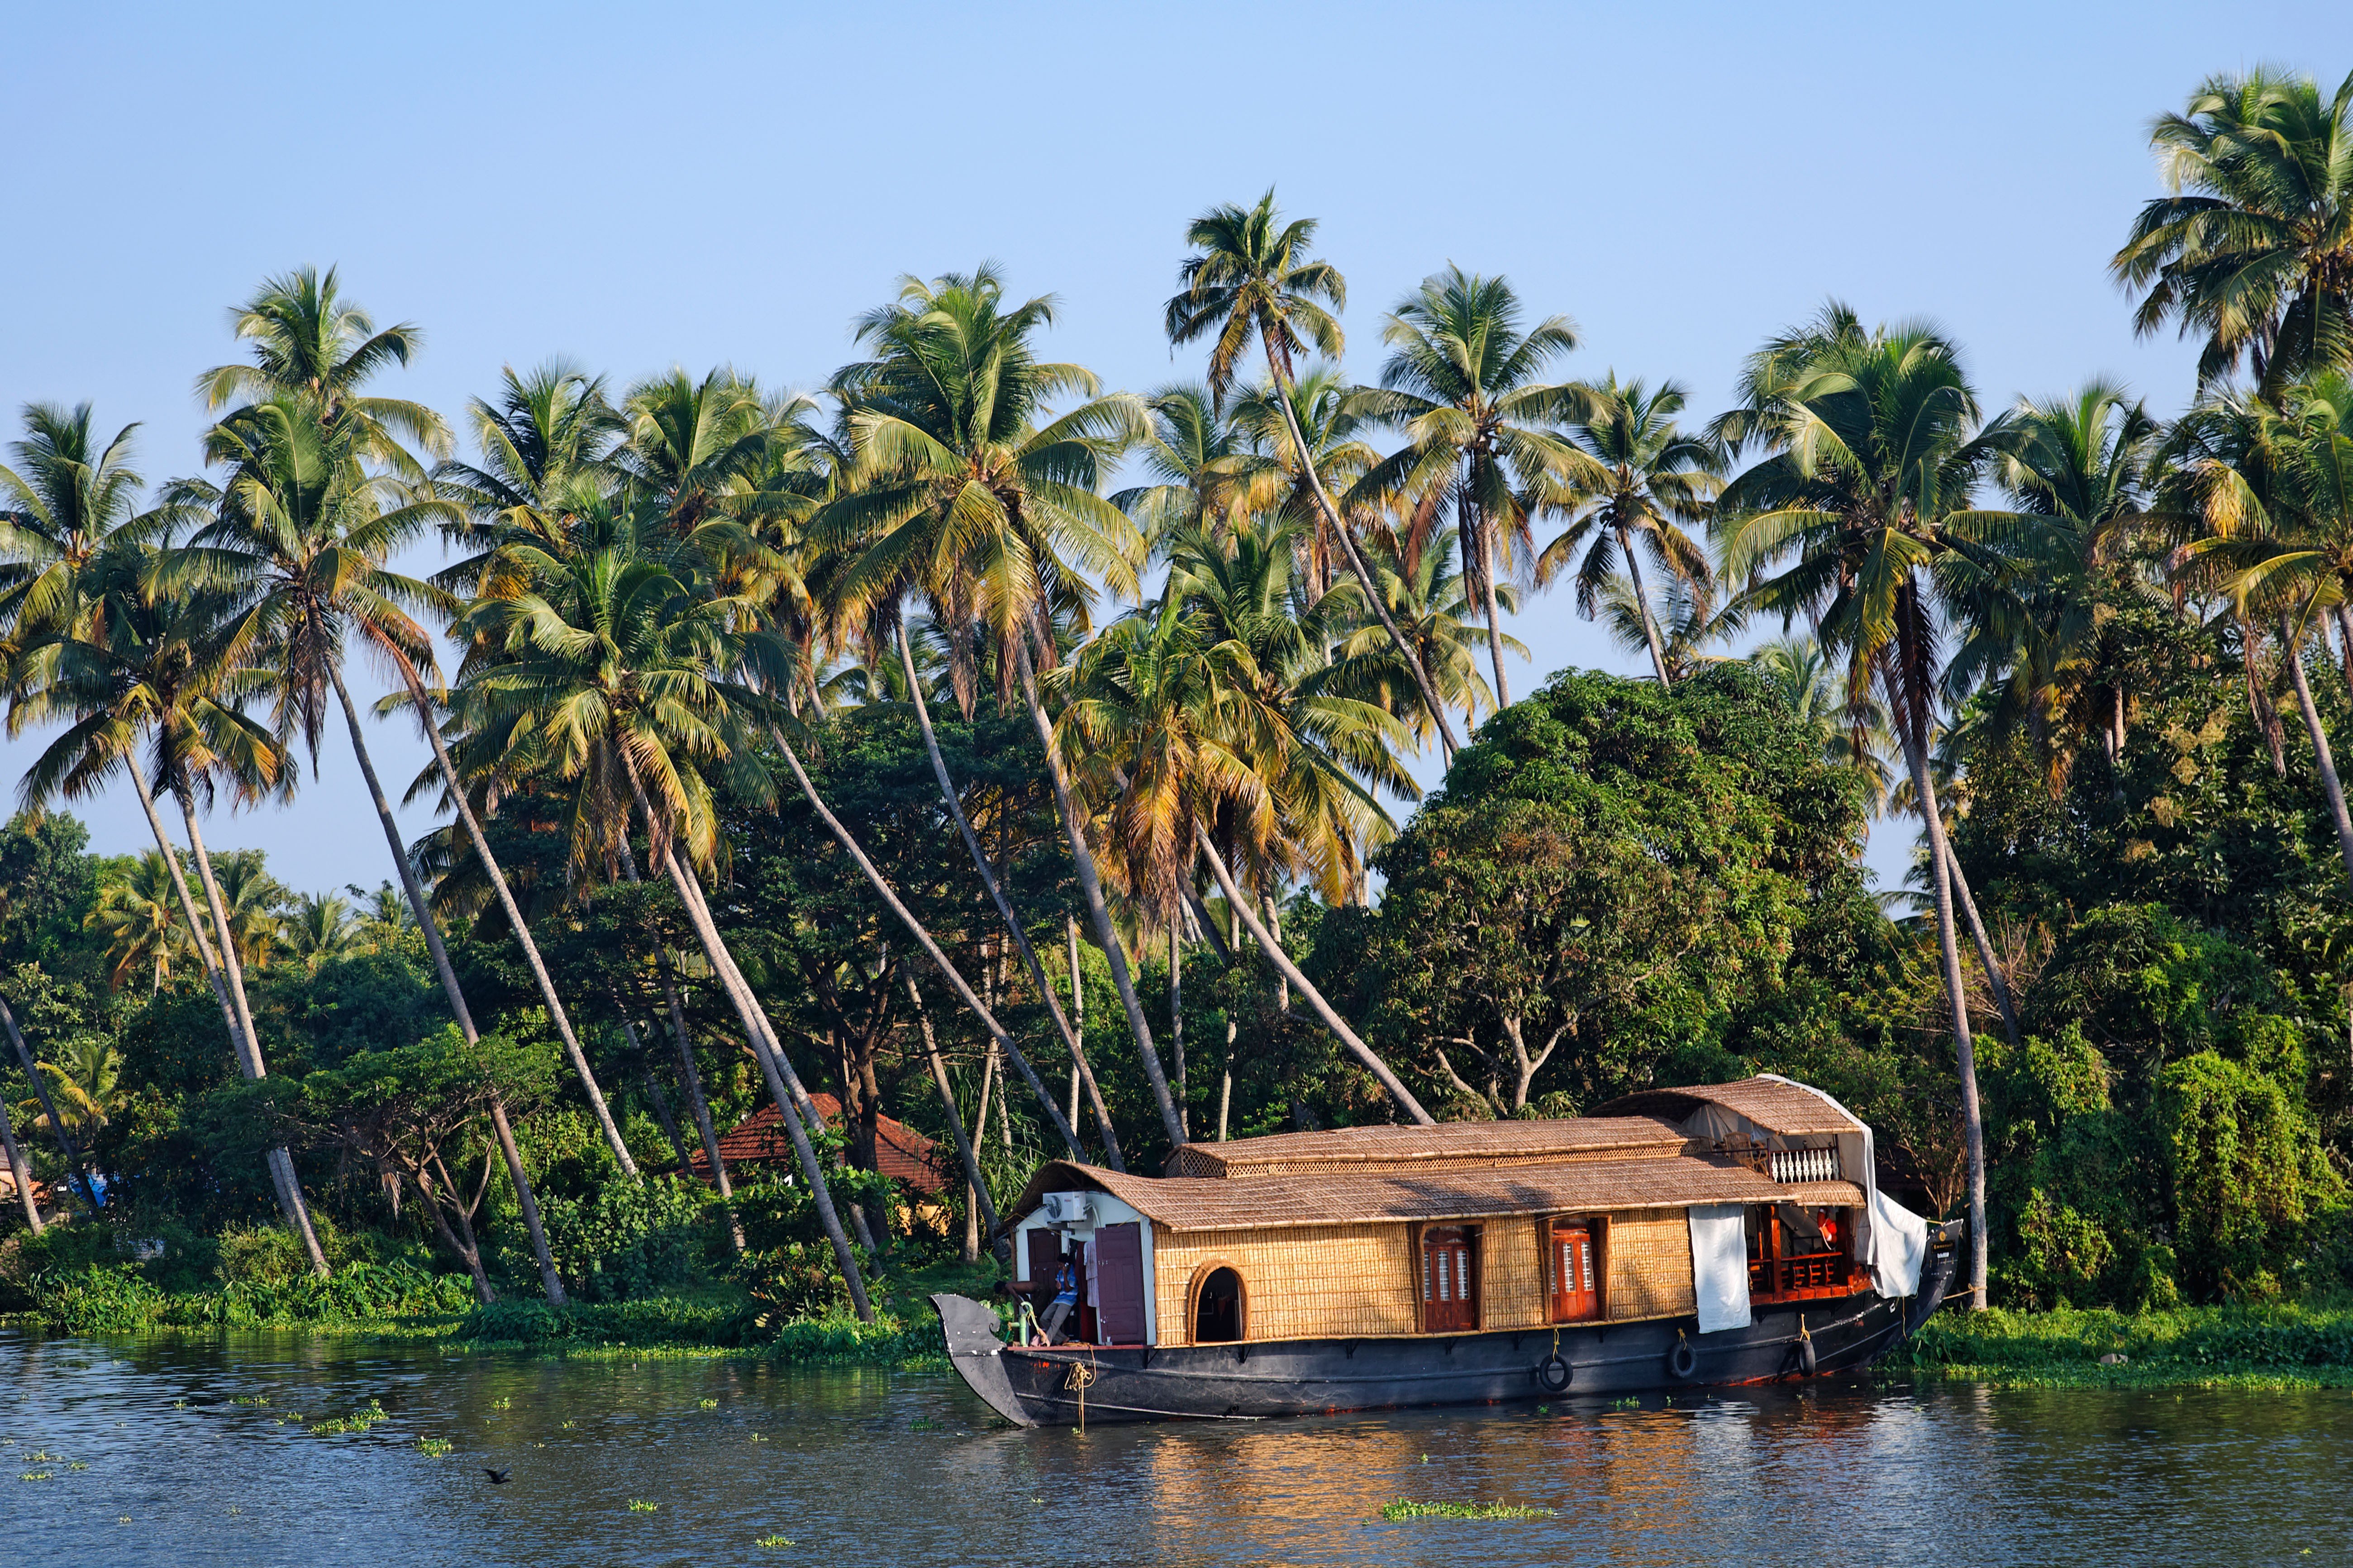 The good, bad and ugly sides to cruising the backwaters of 